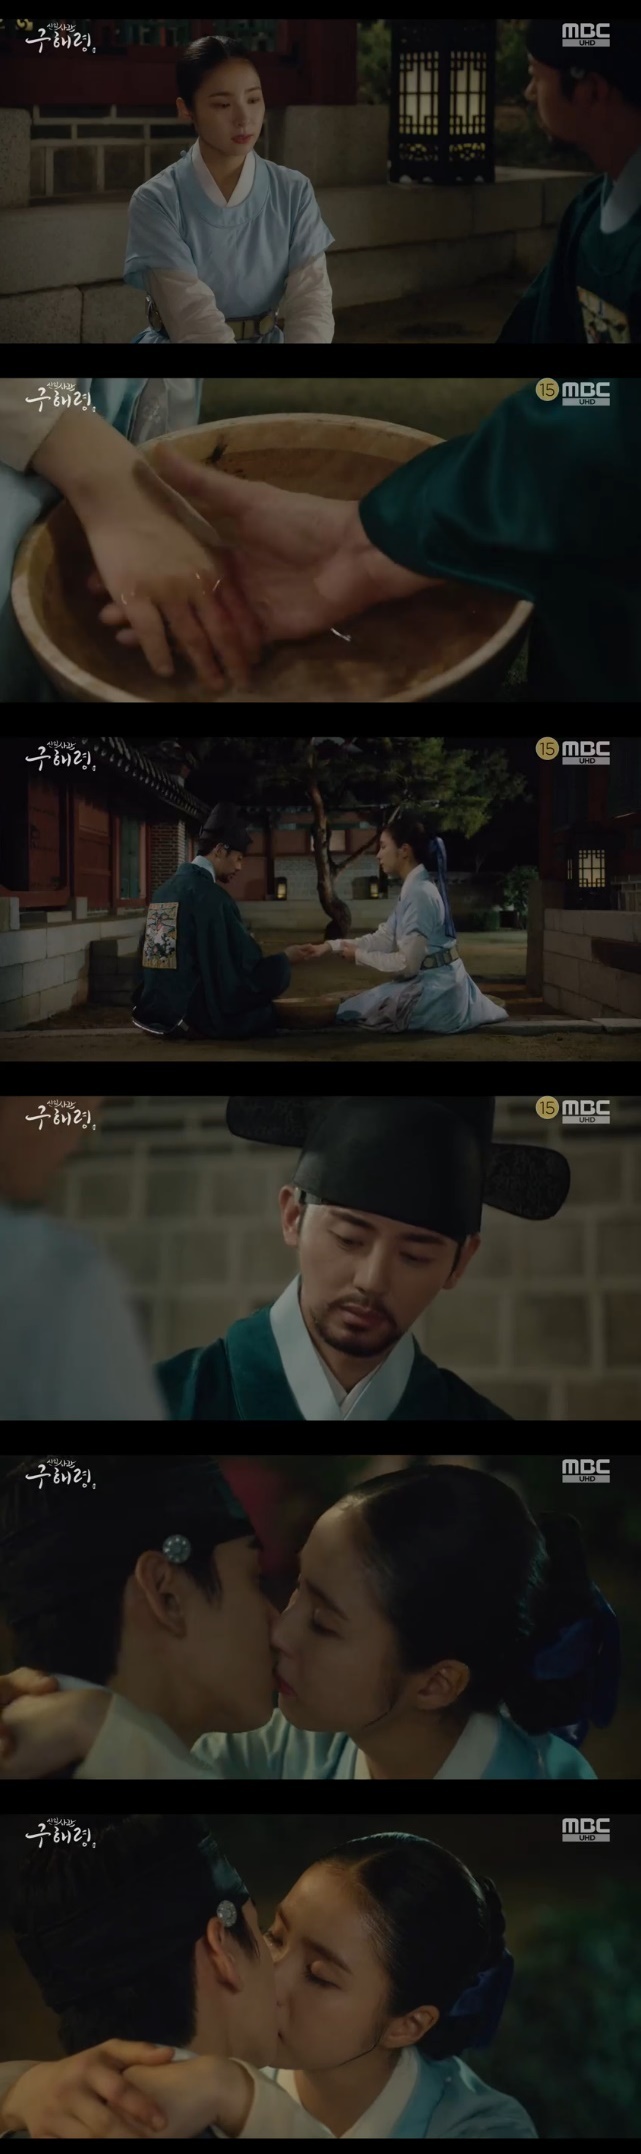 Seoul = = New cadet Rookie Historian Goo Hae-ryung Lee Ji-hoon strode up to Shin Se-kyung.In the MBC drama New Entrepreneur Rookie Historian Goo Hae-ryung, which was broadcast on the afternoon of the 22nd, Min Woo-won (Lee Ji-hoon), a senior senior at the premiere of the 7th edition of the album and Ada Lovelace Rookie Historian Goo Hae-ryungShin Se-kyung), carefully expressed his mind.On this day, Min Woo-won came across the hands of Rookie Historian Goo Hae-ryung, whose hand was badly damaged by his personal records.On this occasion, Rookie Historian Goo Hae-ryung brought up the story as Ada Lovelace: I just got in and Ive already been to the money department.Half a year later, I will not be exiled to Jeju Island far away. Min Woo-won confessed that he would not let it happen again when he heard this. Rookie Historian Goo Hae-ryung revealed his heartfelt heart.Rookie Historian Goo Hae-ryung said, Like you appealed this time. I heard the story. Thank you.Min Woo-won then wiped the hands of Rookie Historian Goo Hae-ryung and said, I am sorry, I have suffered such a hardship. I understand if I want to step down here.Nobody will blame you, he said.Rookie Historian Goo Hae-ryung said, I think it was a frog in my real past life. I want to see the end of it. Do not be sorry.It is not because of the precept that the degradation is bothering me like this. I may be a Parisian life, but I am confident that I will not lose my strength and strength. Min Woo-won said, It is a very heavy rhetoric, but he looked at Rookie Historian Goo Hae-ryung fondly.While Rookie Historian Goo Hae-ryung shared his first kiss with Dae-gun Irim (Cha Eun-woo), it is noteworthy whether Min Woo-won and them will show a full-scale triangular relationship.Meanwhile, New Entrepreneur Rookie Historian Goo Hae-ryung is a drama depicting the first problematic Ada Lovelace () Rookie Historian Goo Hae-ryung of Joseon and the Phil full romance annals of Prince Irim, the anti-war mother solo, broadcast every Wednesday and Thursday at 8:55 pm.